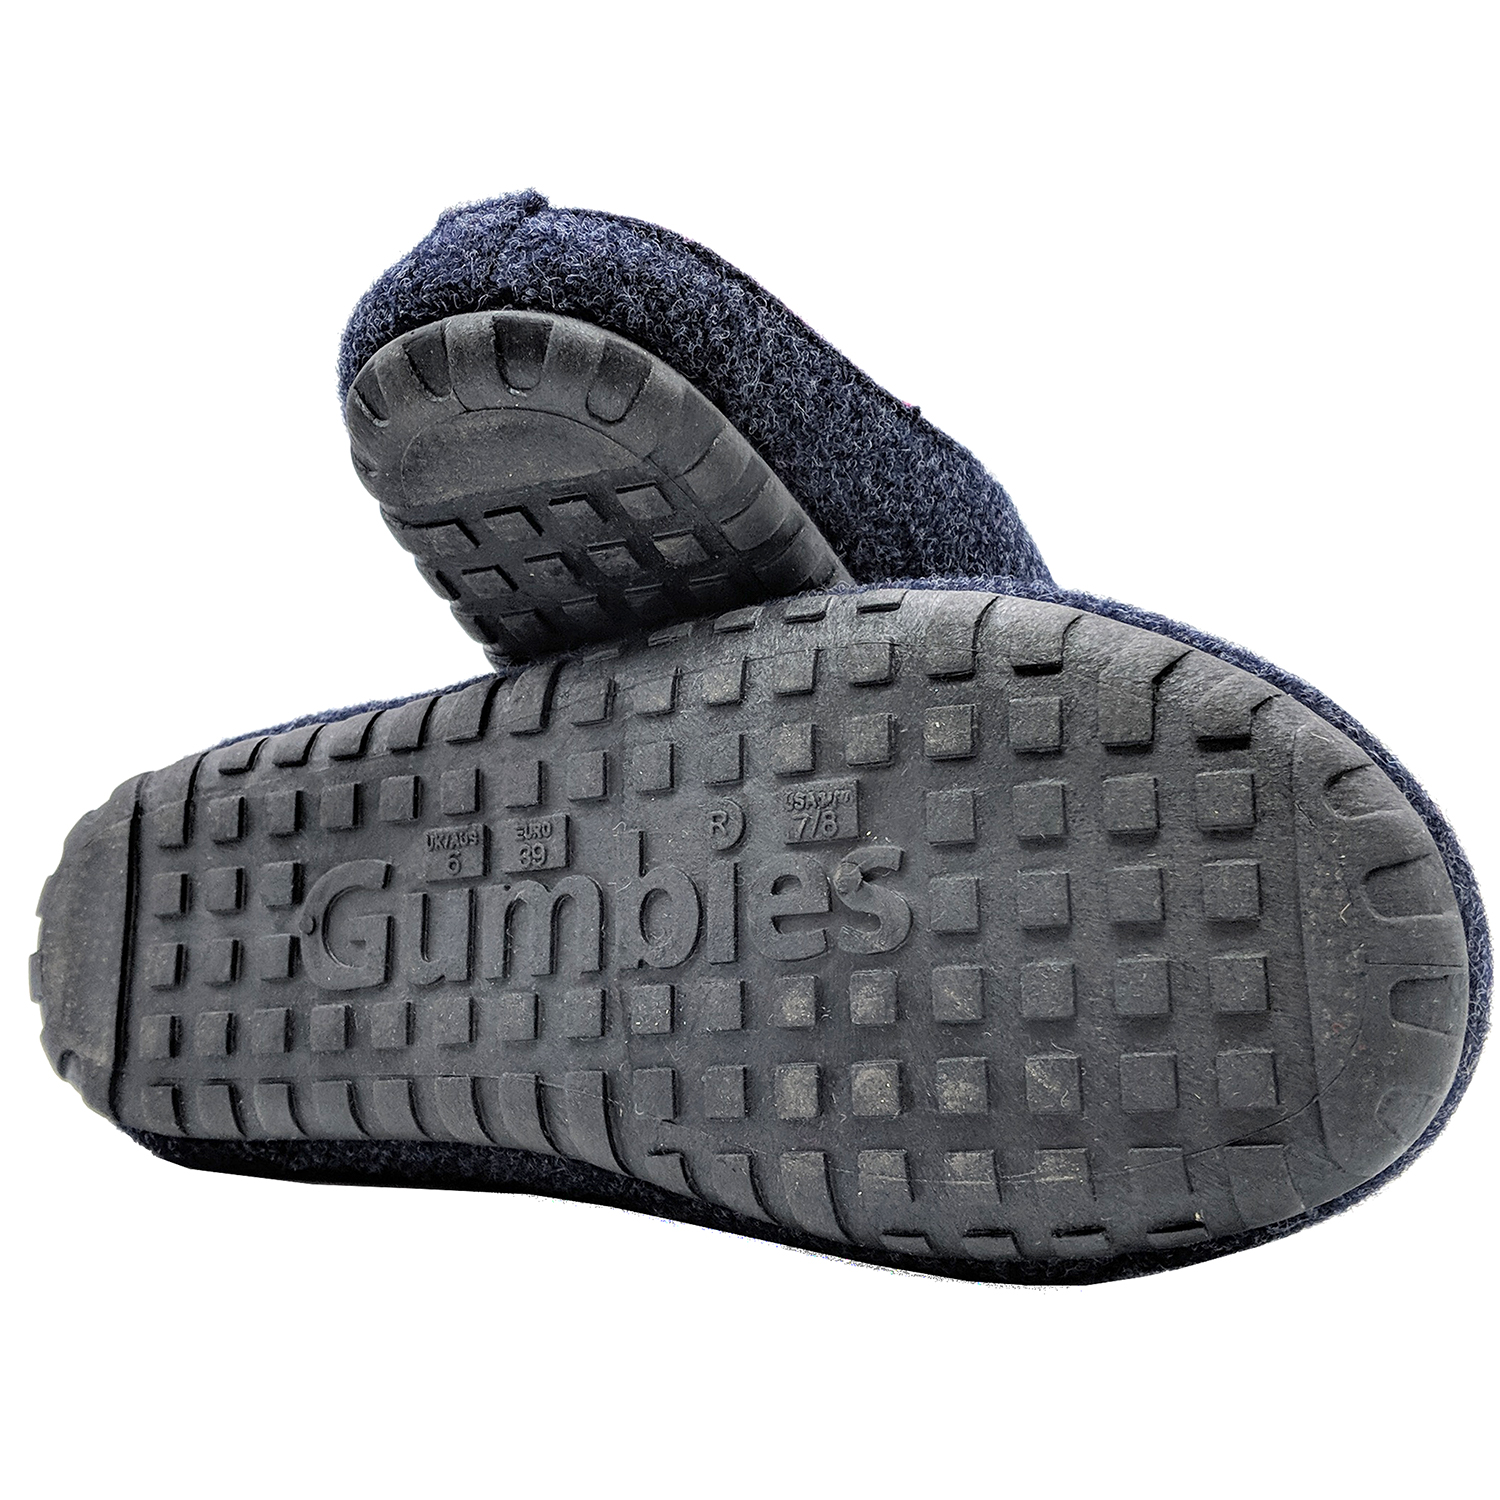 GUMBIES - Outback Slipper, NAVY-PINK